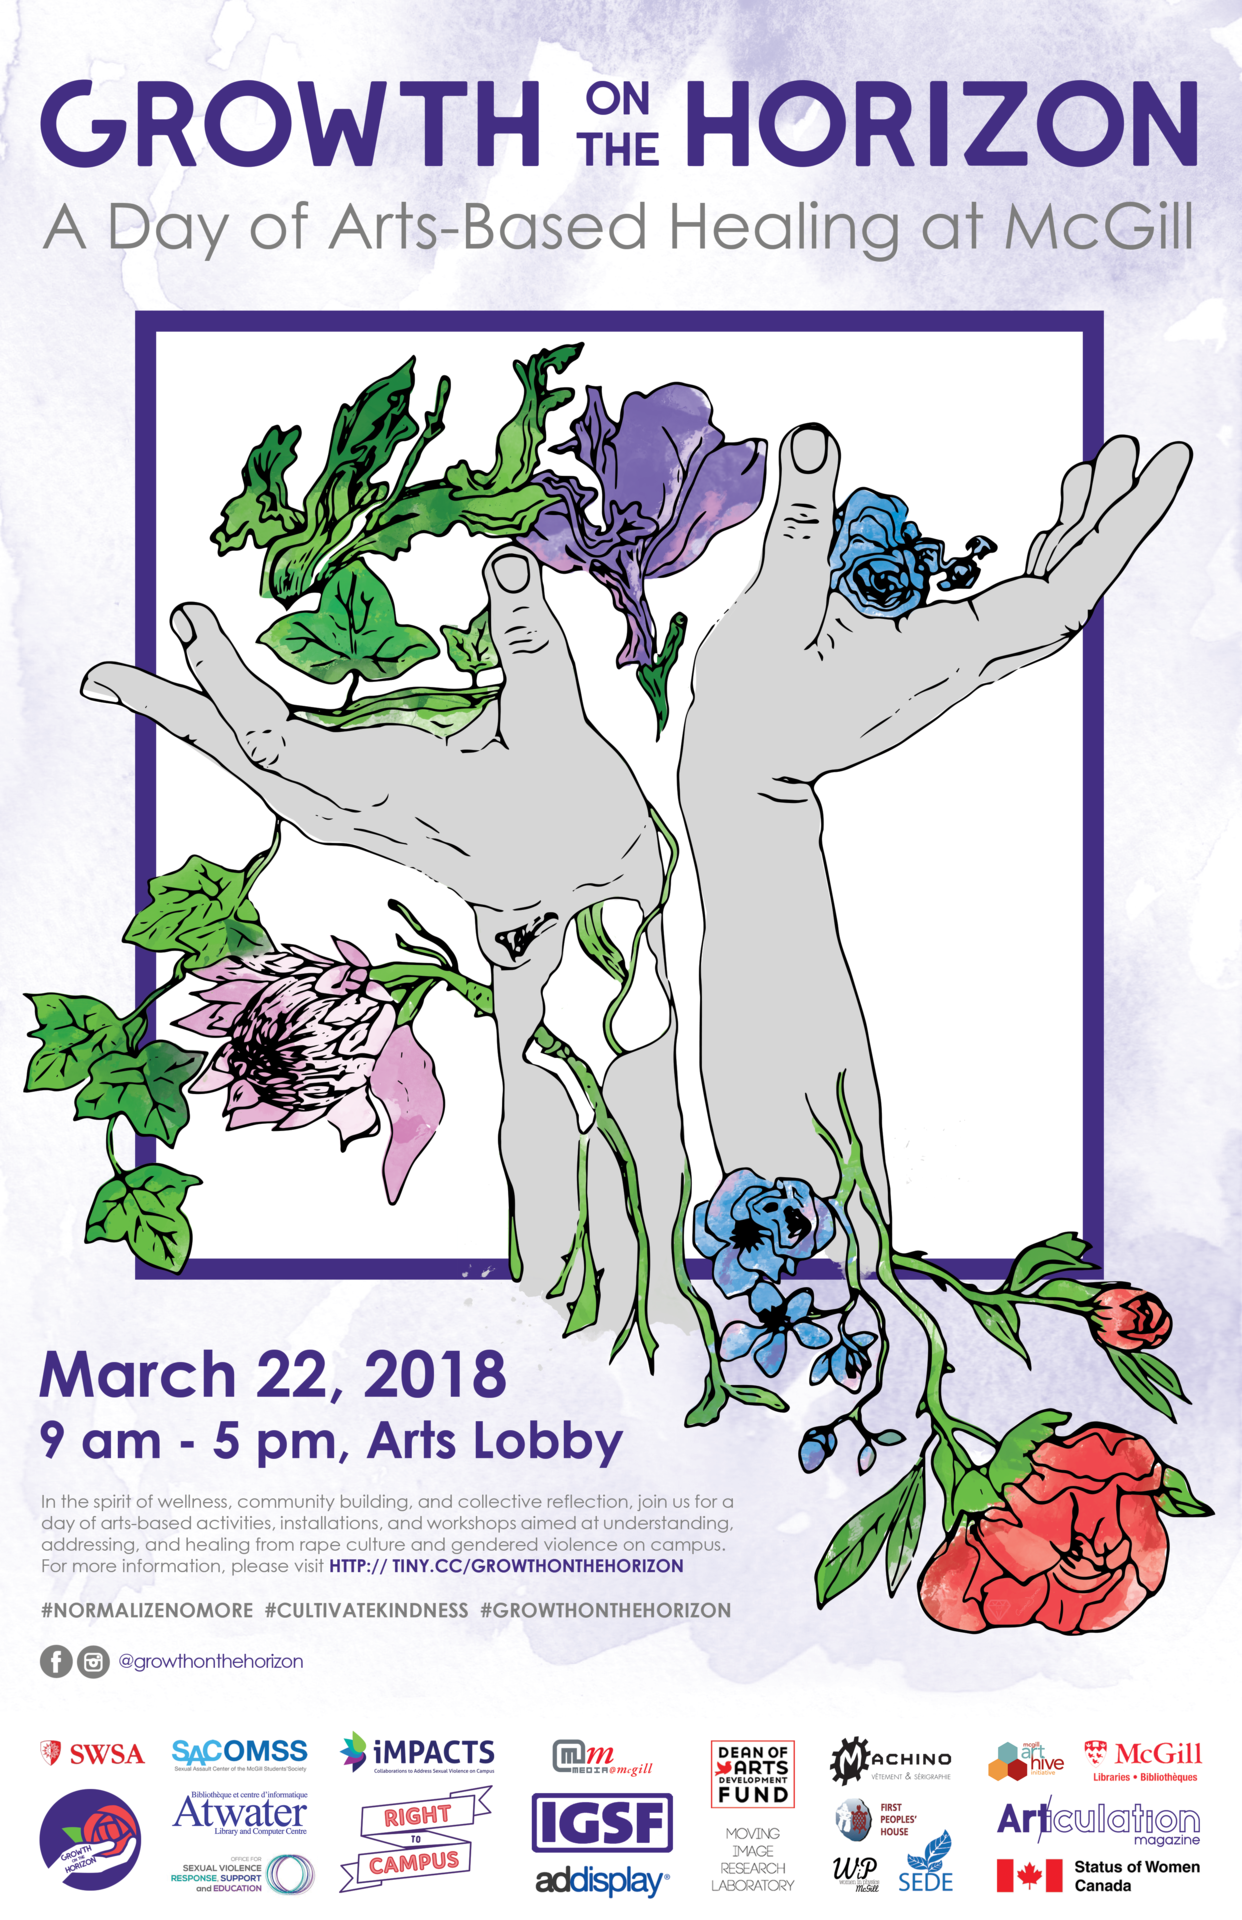 In the spirit of wellness, community building, and collective reflection, join us for a student-initiated, arts-based event aimed at understanding, addressing, and healing from rape culture and gendered violence on campus.Growth on the Horizon will...